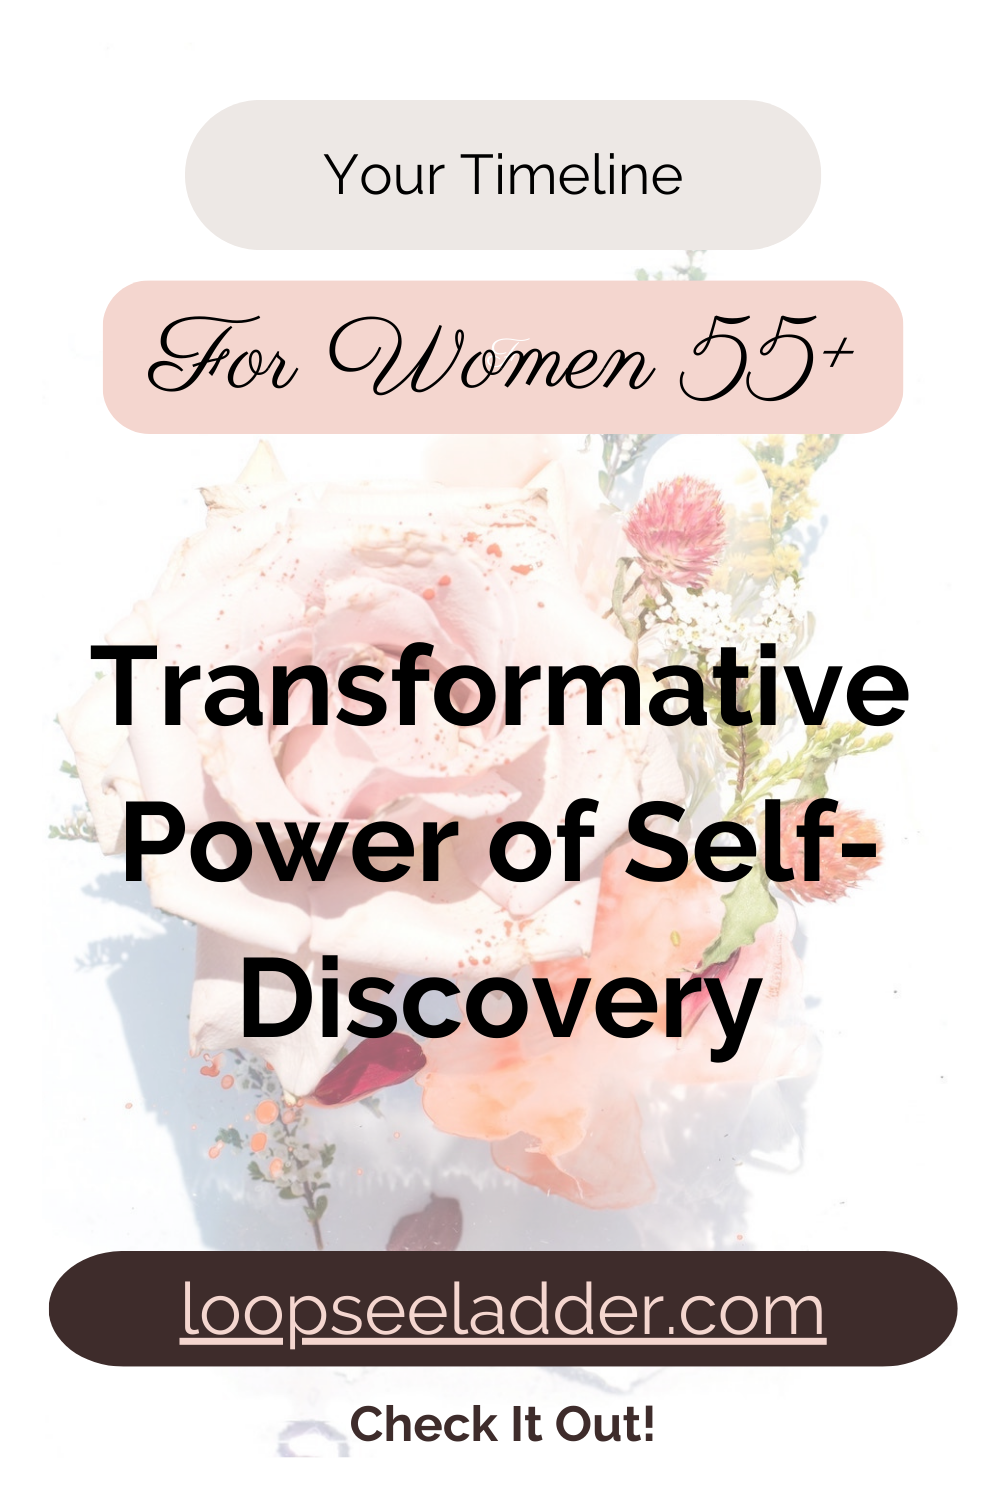 The Transformative Power of Self-Discovery: Finding Your True Purpose After 55